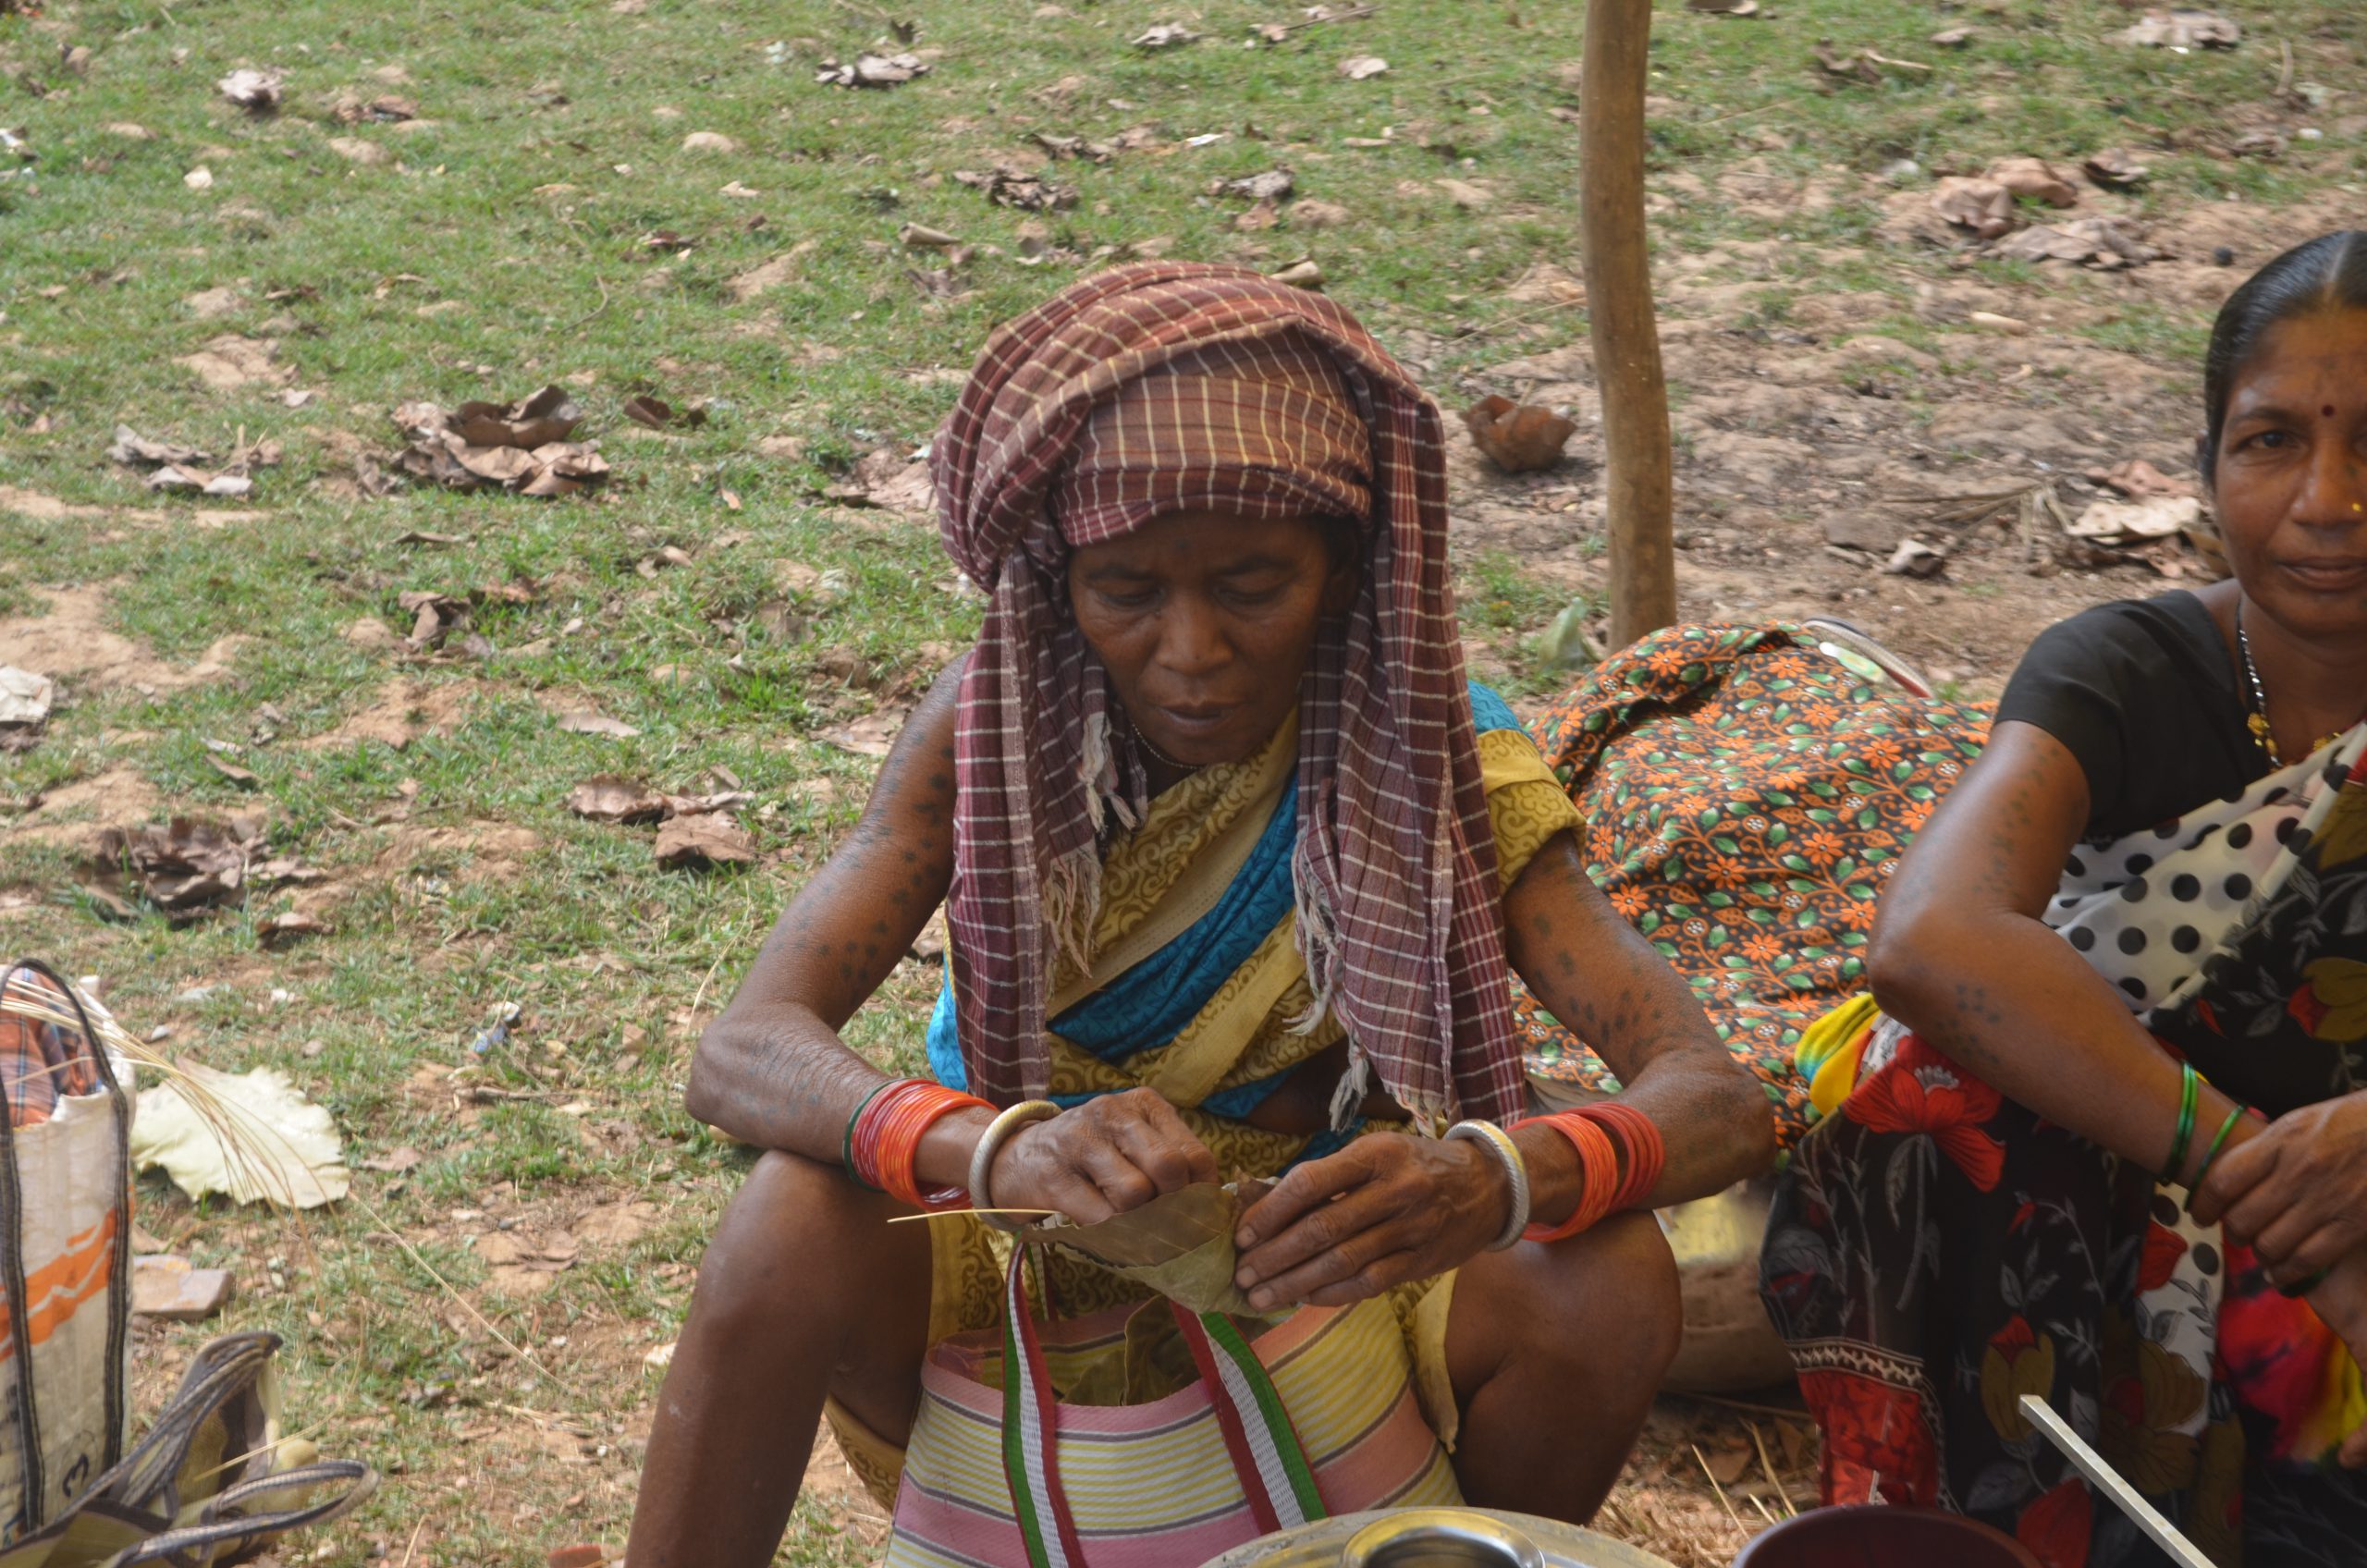 Visit tribal markets & get a first hand experience on the way of life of the tribal communities